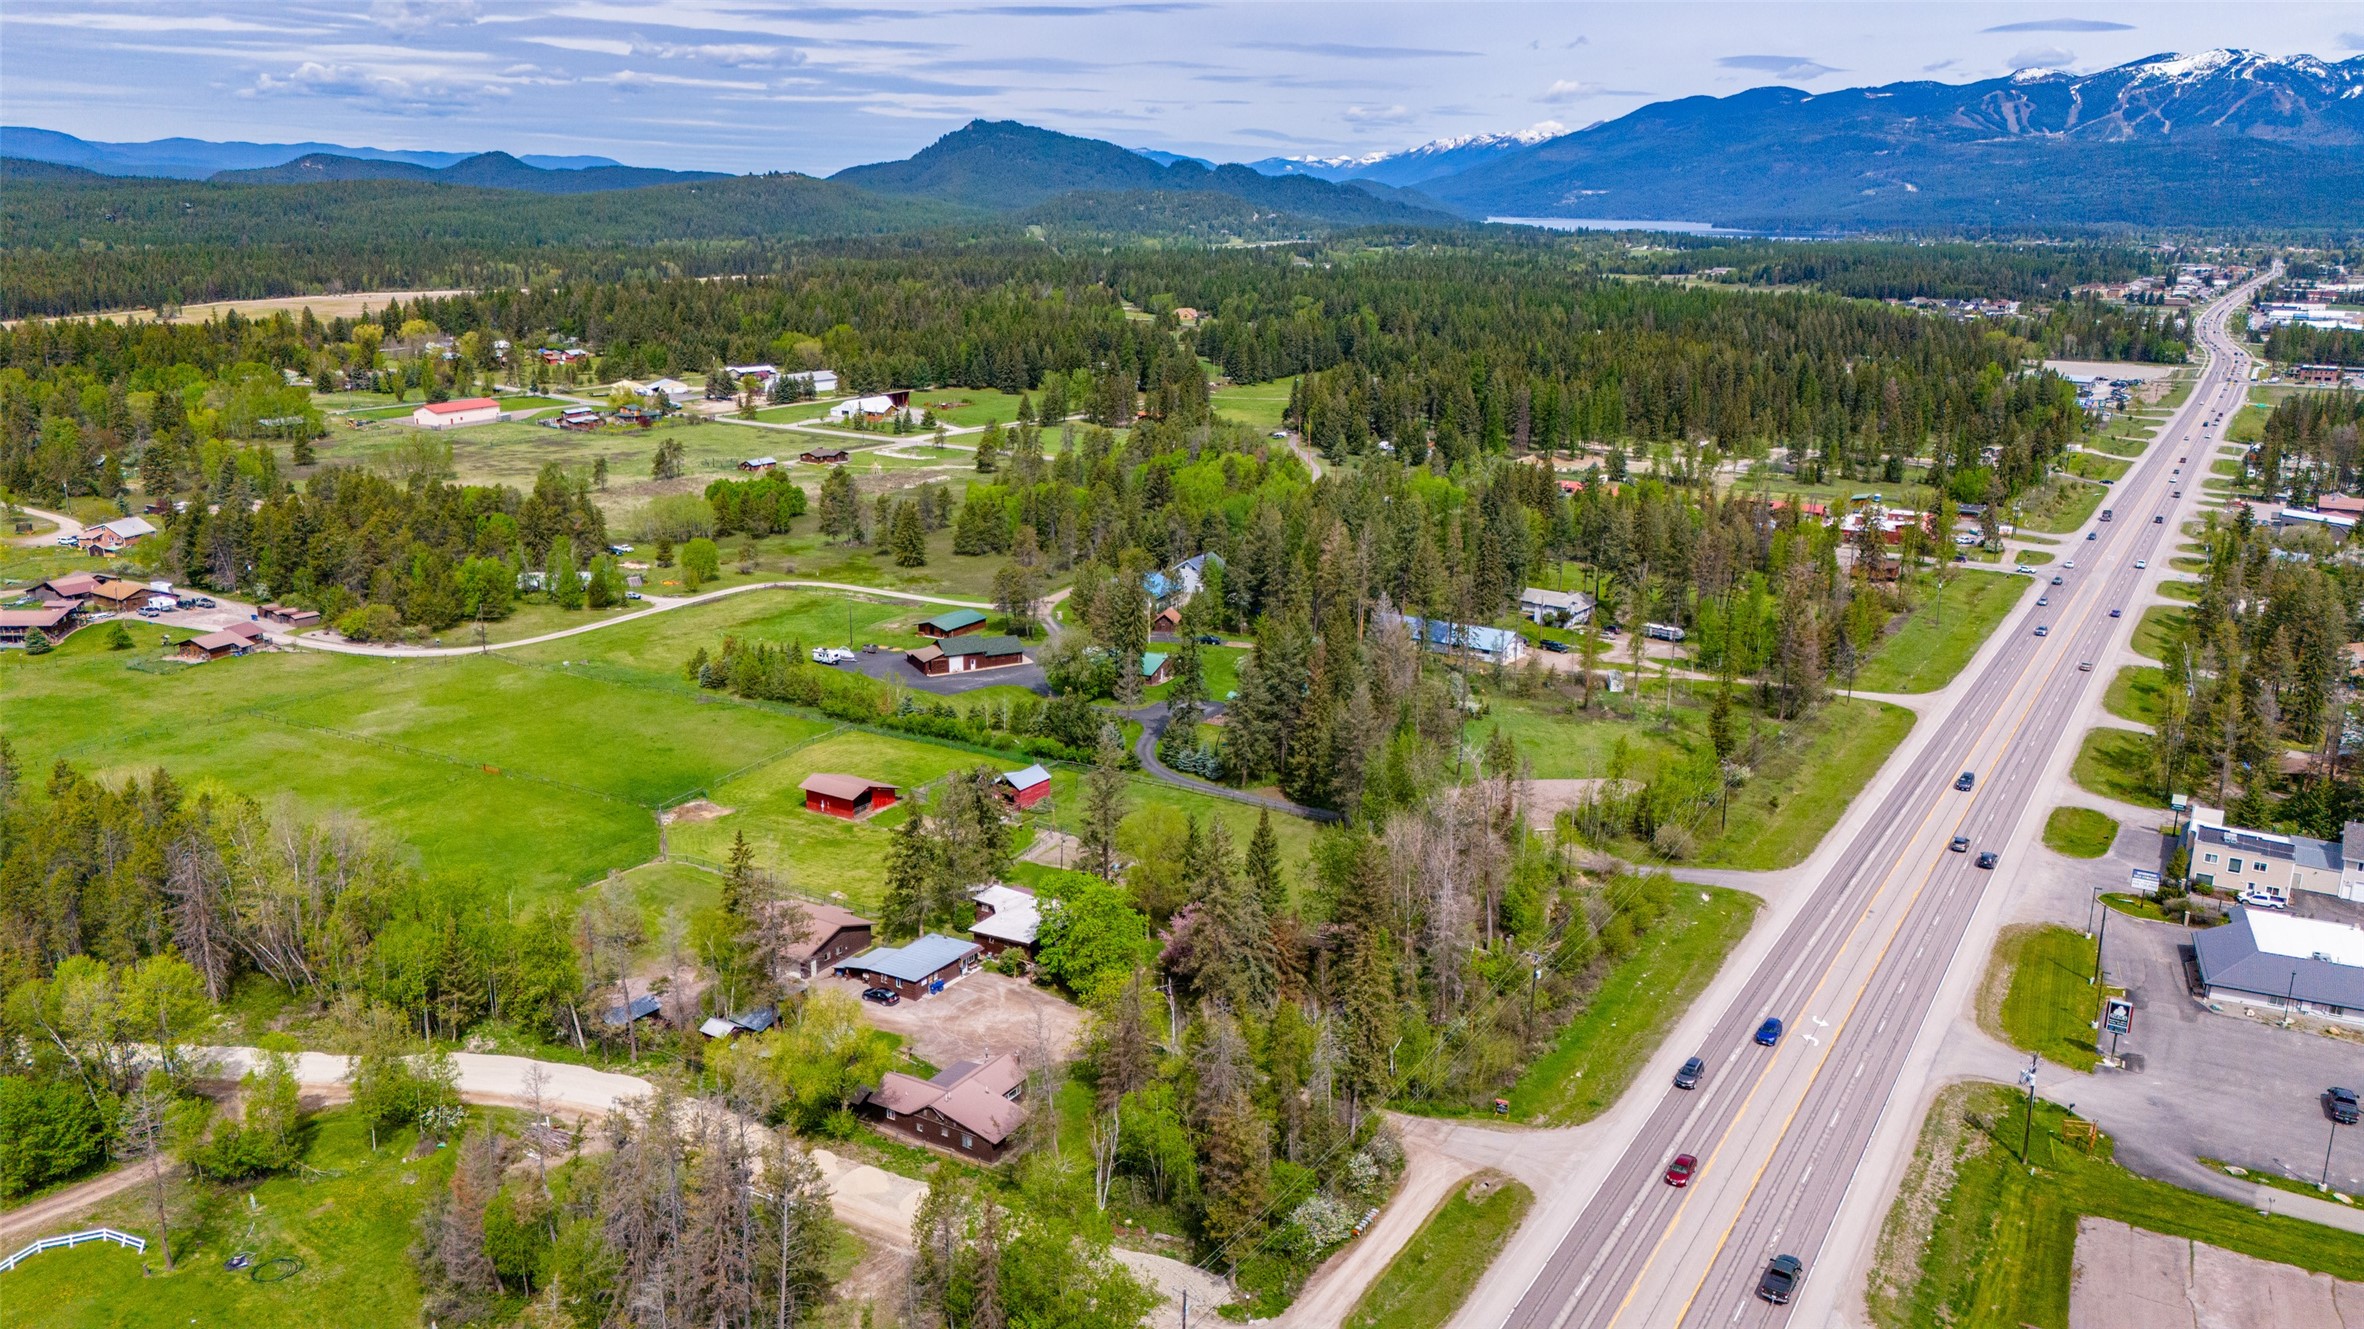 Wide Open Opportunity! This expansive mixed-use property, currently utilized as a residential haven w/ 3 distinct living units, spans 5+ flat & subdividable acres of prime real estate, boasting direct access to Highway US 93 S. Just Minutes from downtown Whitefish, this versatile property offers a wealth of possibilities. BS/HO zoning offers an array of potential uses, making it an ideal investment. Professional offices or creative workspaces, showrooms, farm/equipment sales, light assembly & manufacturing/fabrication to name a few. Additionally, the property offers various conditional uses, including a brewery/distillery, storage facilities, short-term rentals, & even multifamily dwellings. Main house: 2bed/1bath, Guest: 3/1, Apt: 1/1. 2 on-site septic systems to serve a total of 8 bedrooms. Don't miss out on the chance to own a piece of Whitefish offering such diverse potential. Please contact Aaron Noel/Brody Broker Team @ 406-407-4857 or your real estate professional.